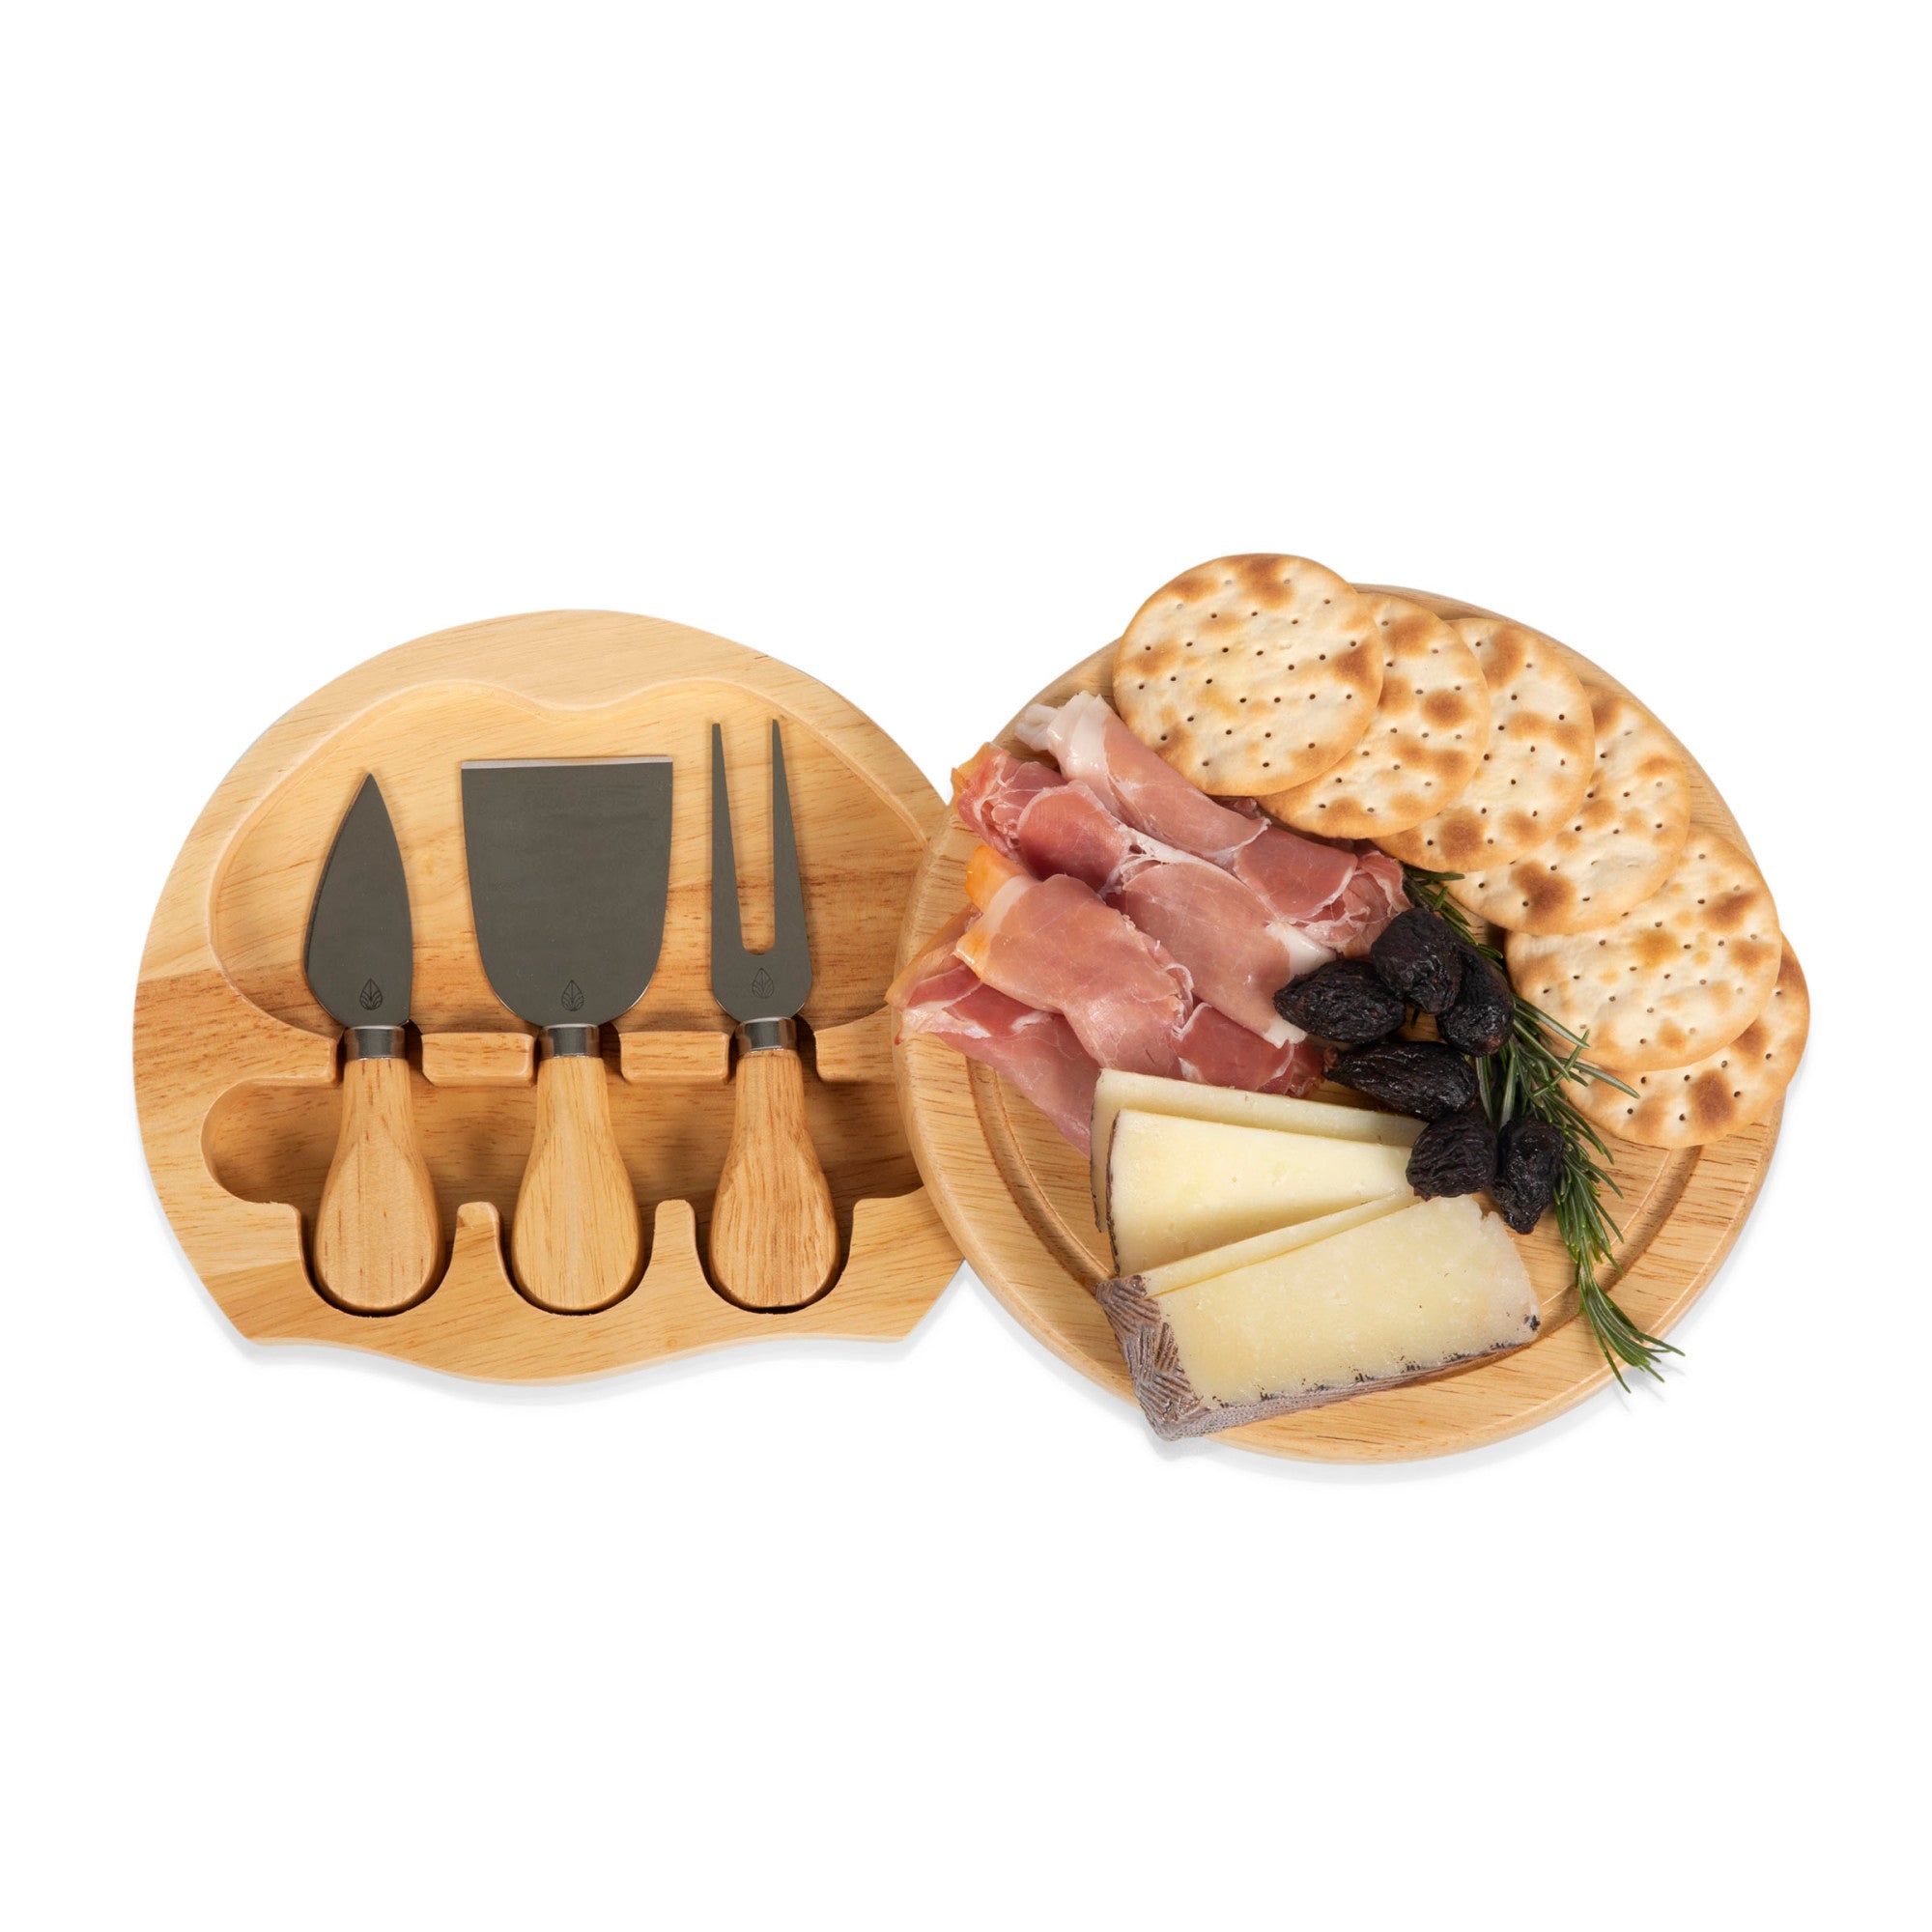 Los Angeles Dodgers - Brie Cheese Cutting Board & Tools Set